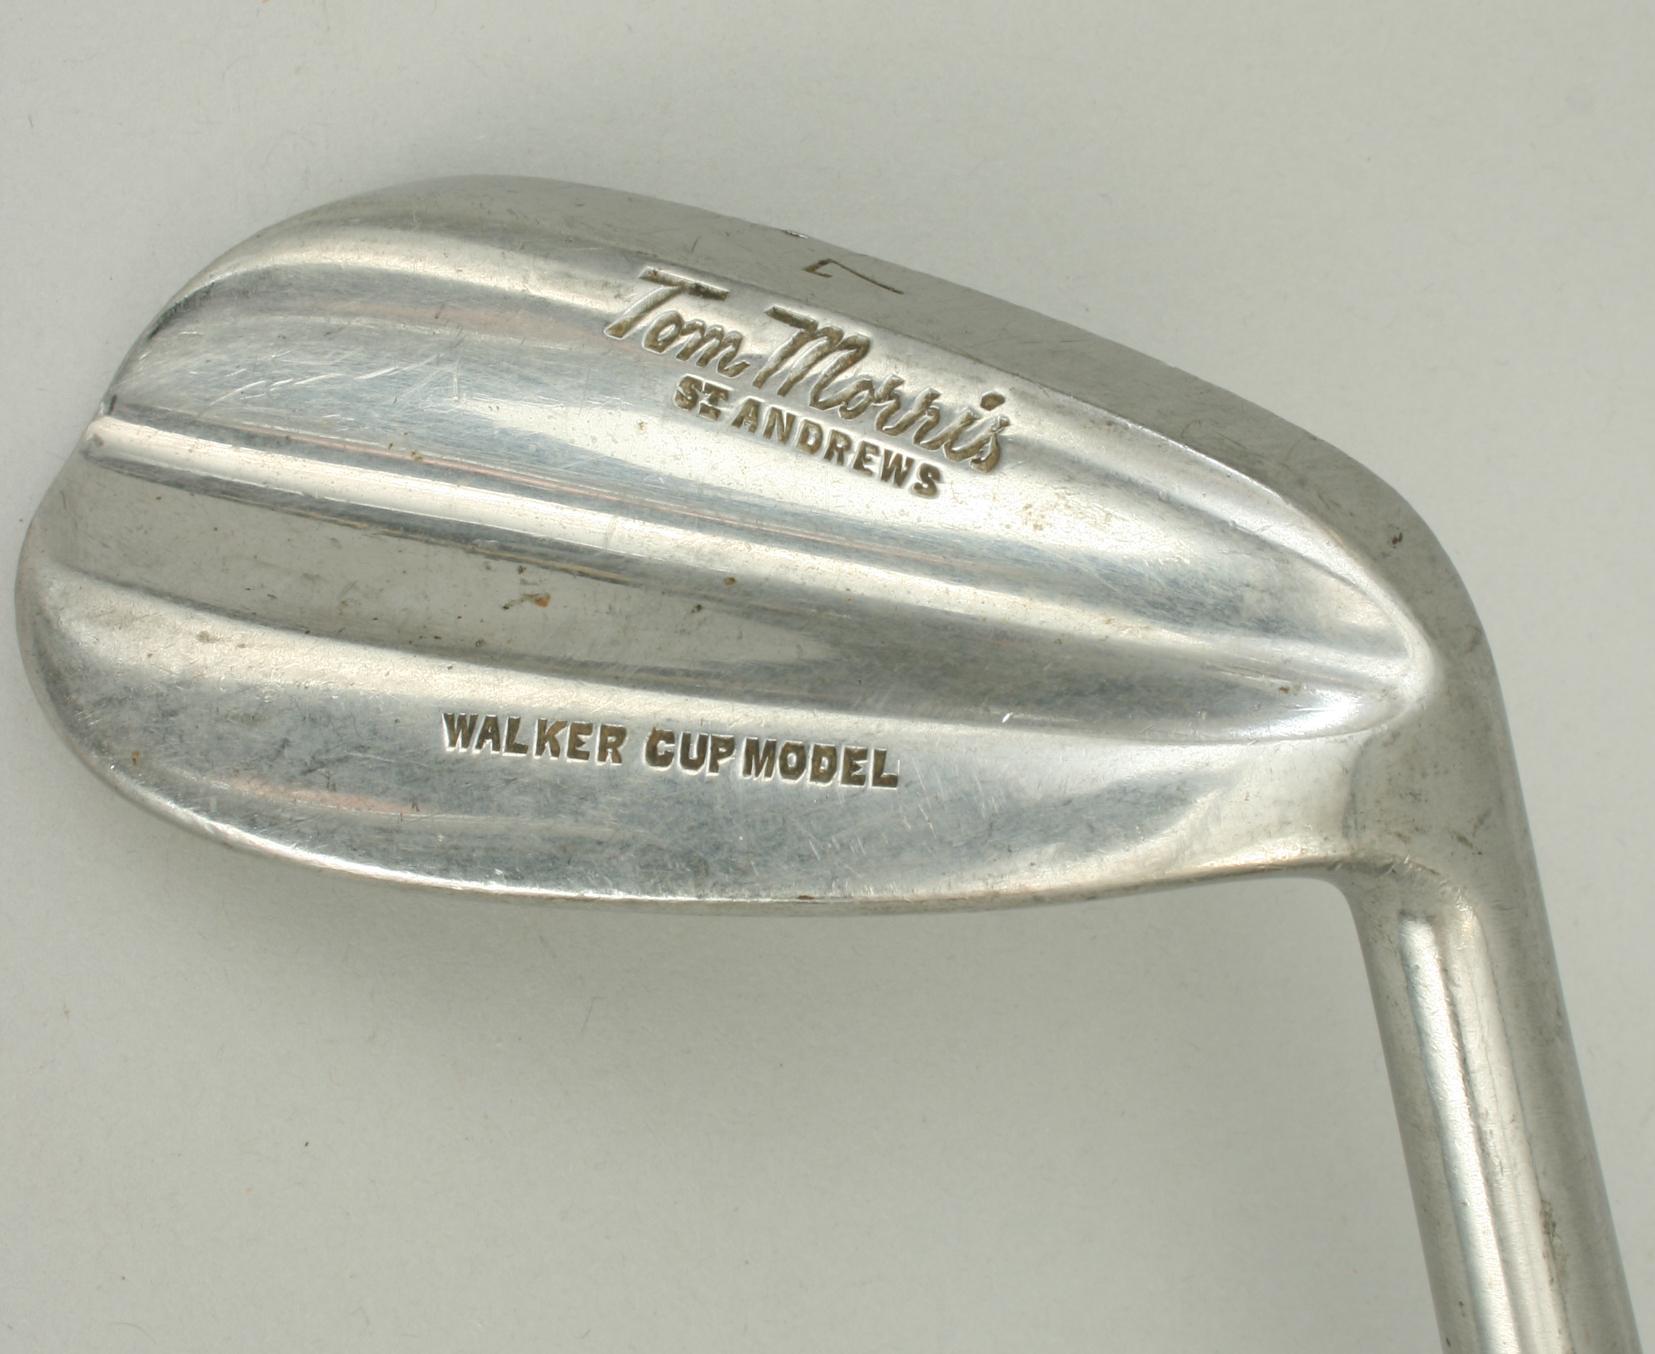 English Steel Shafted Tom Morris Golf Club, St Andrews For Sale